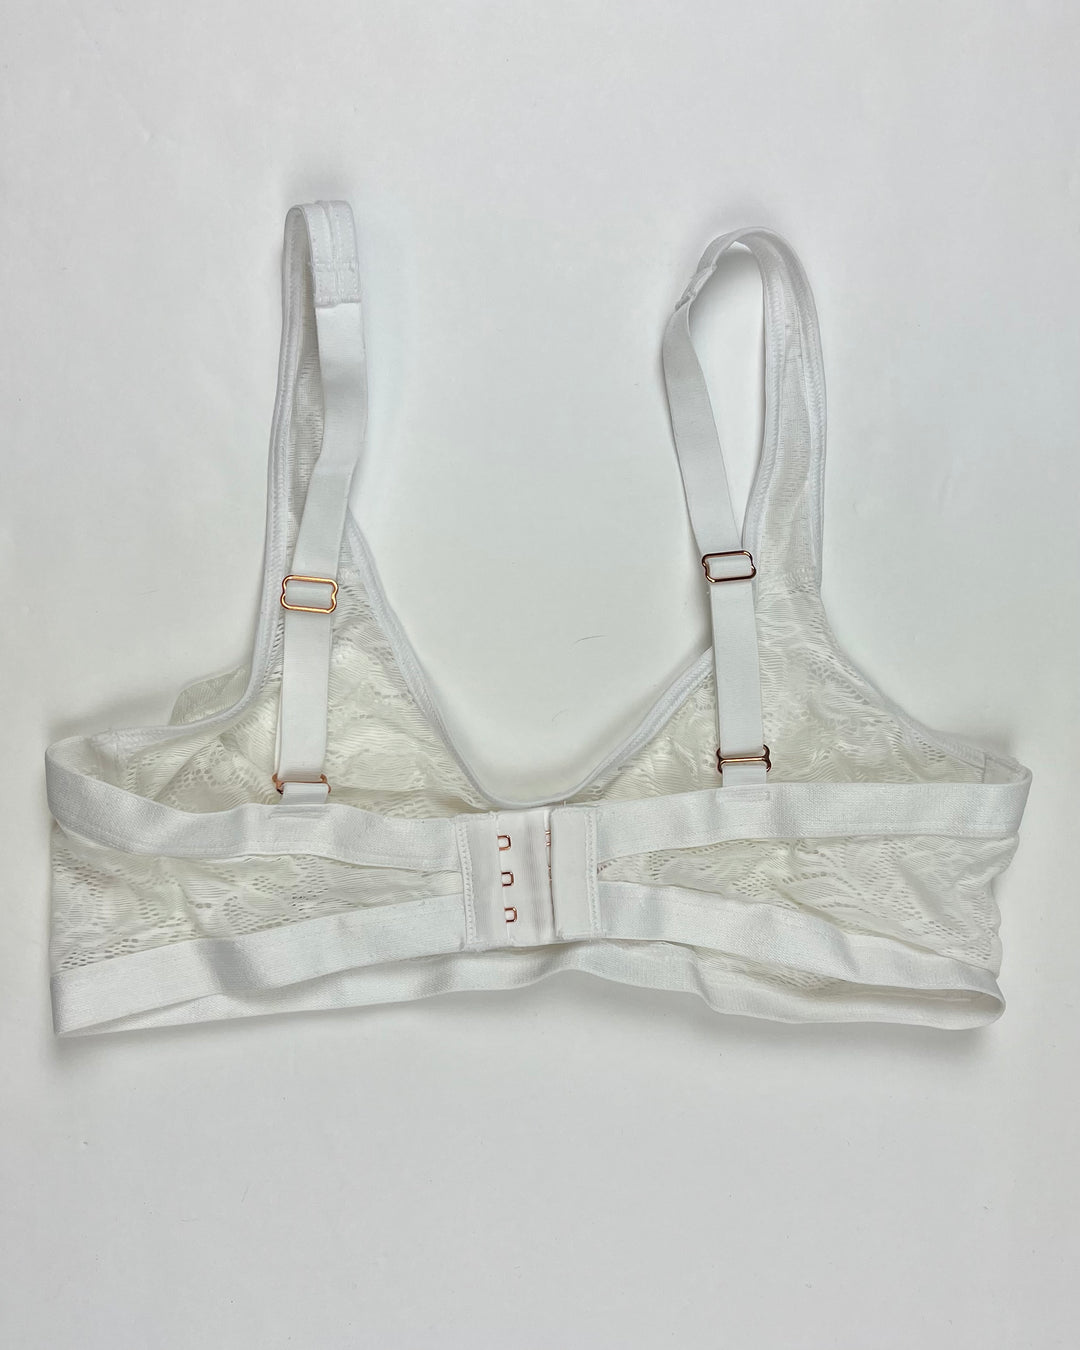 White Lace Bralette - 34C and 34D